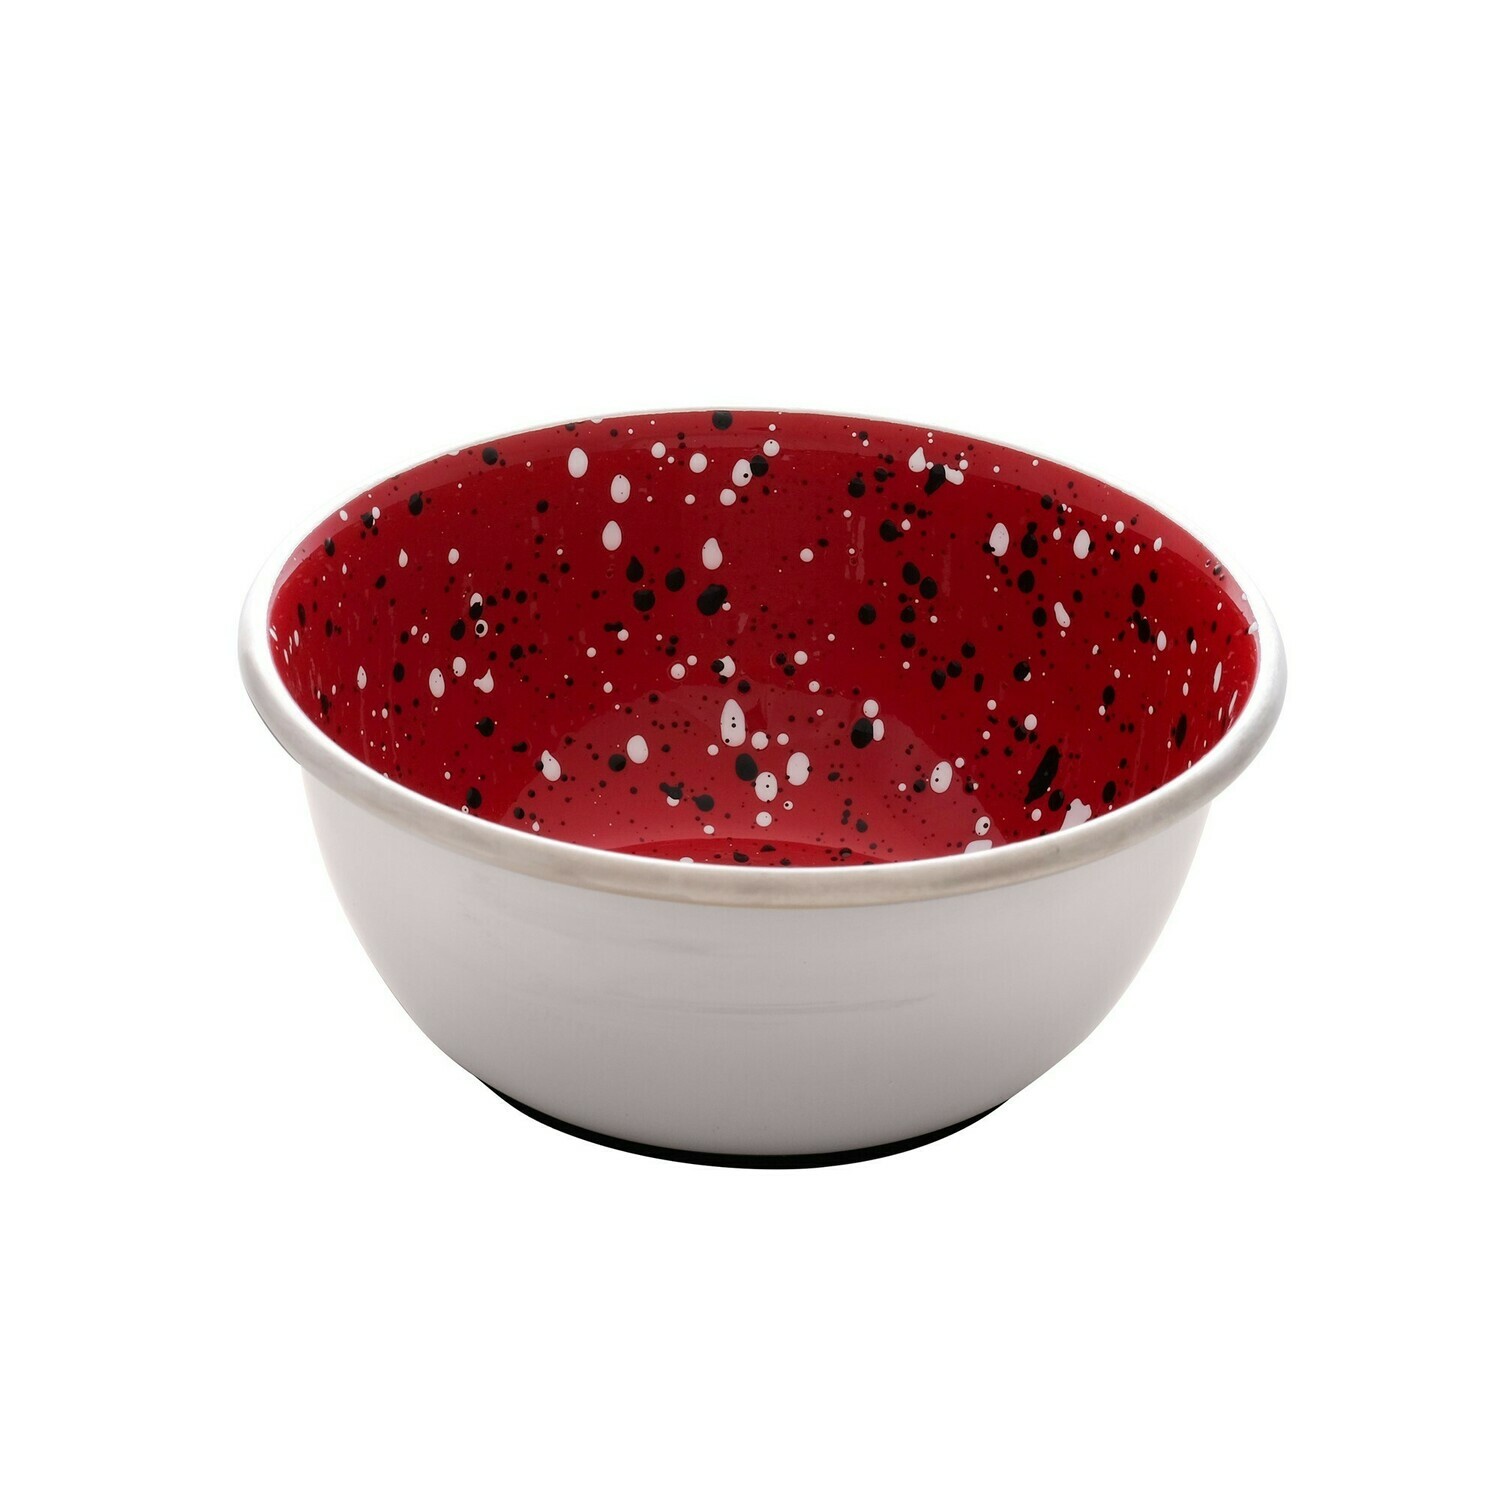 DOGIT STAINLESS STEEL BOWL RED SPECKLE 500ML.